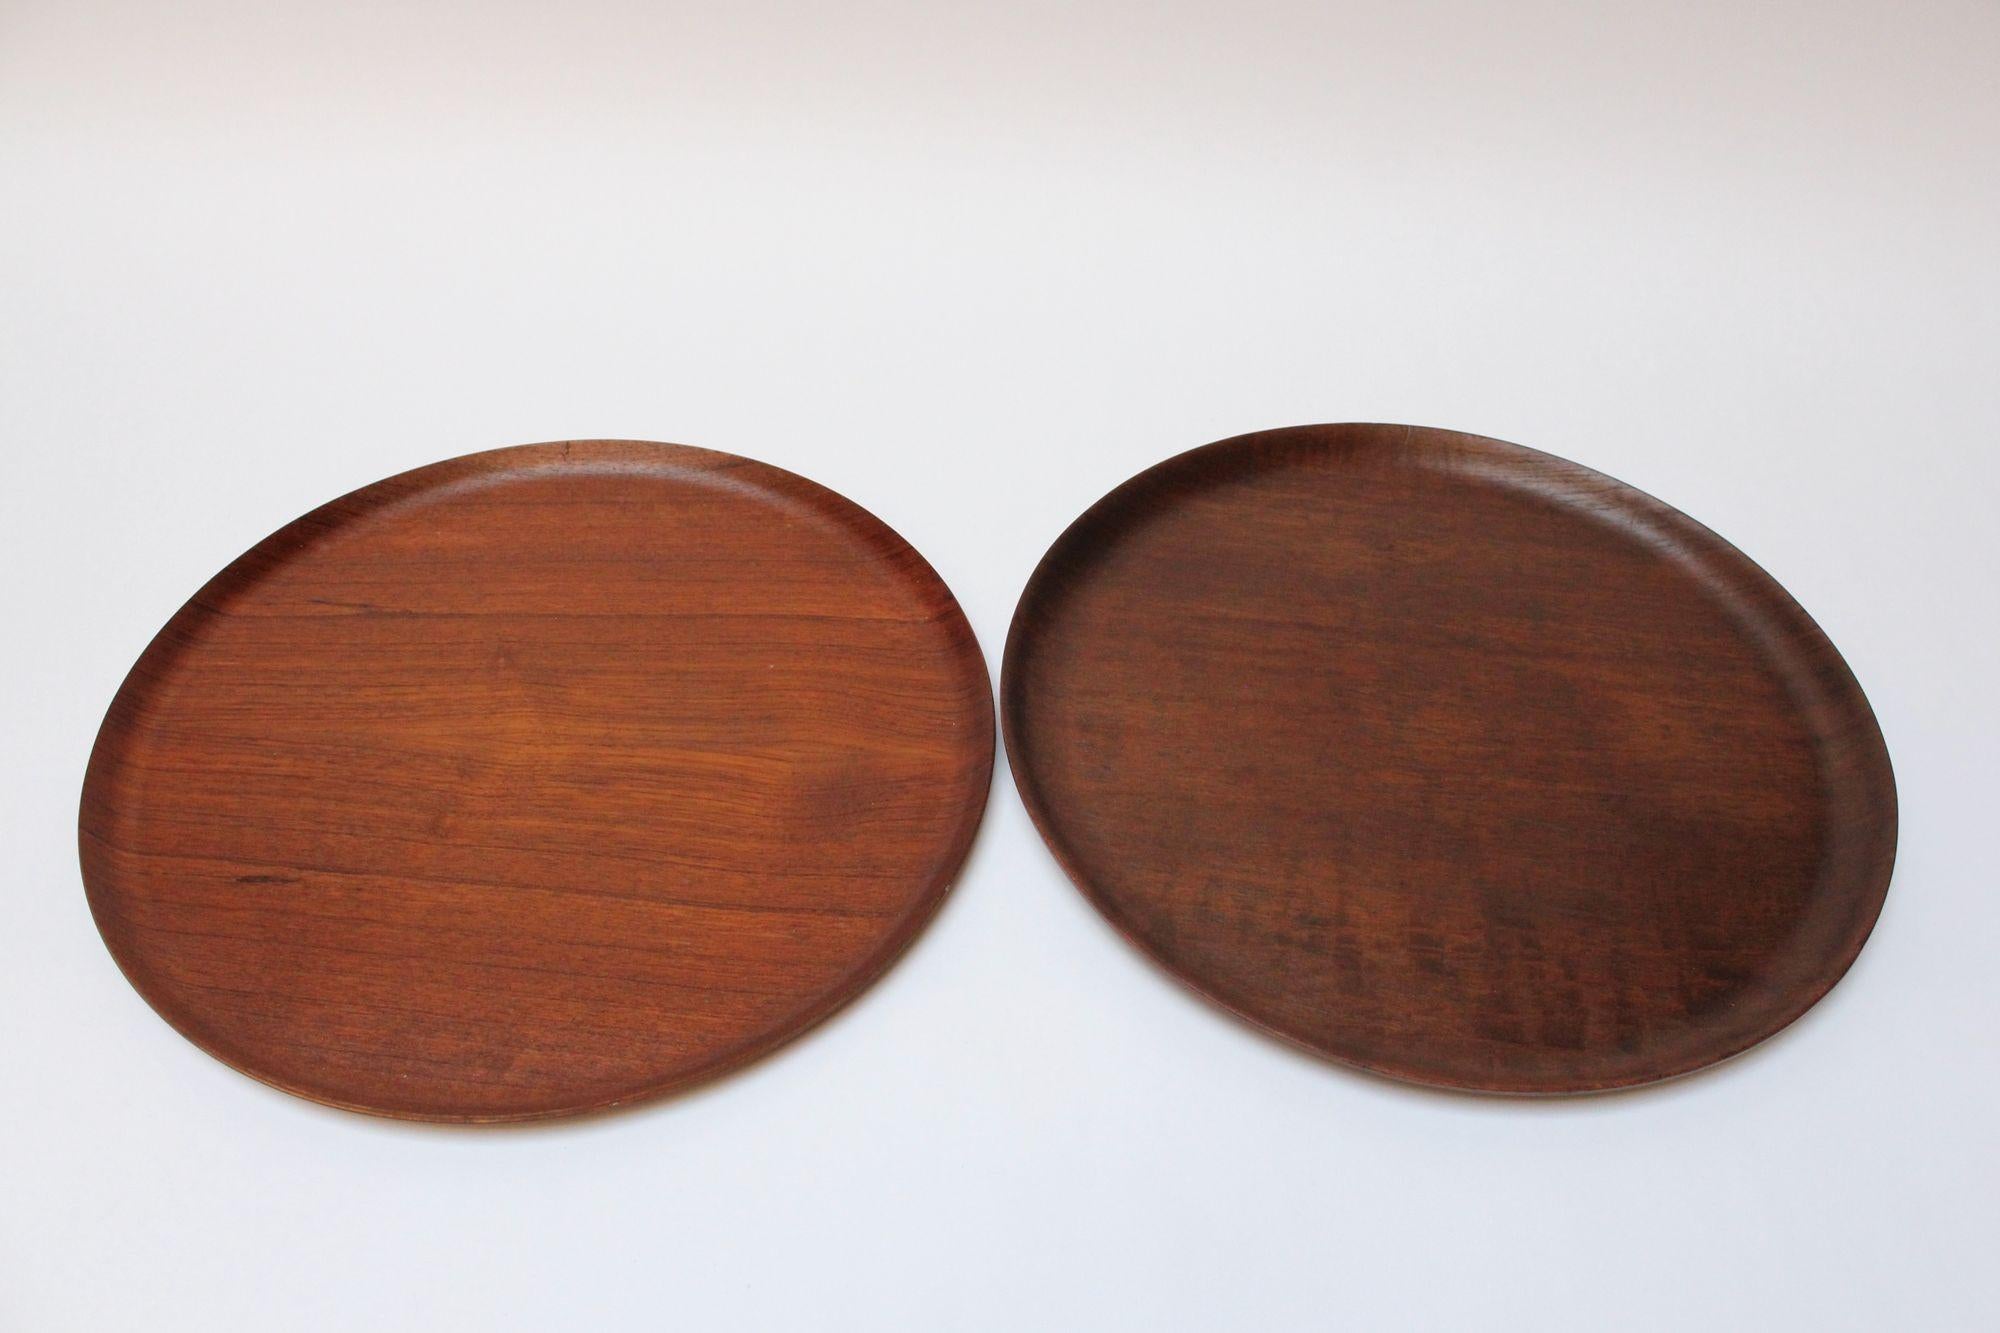 Set of four similar Swedish teak trays with curved edges, ca. 1960s. Slight variations in grain, color, and size (diameters range from 17.25